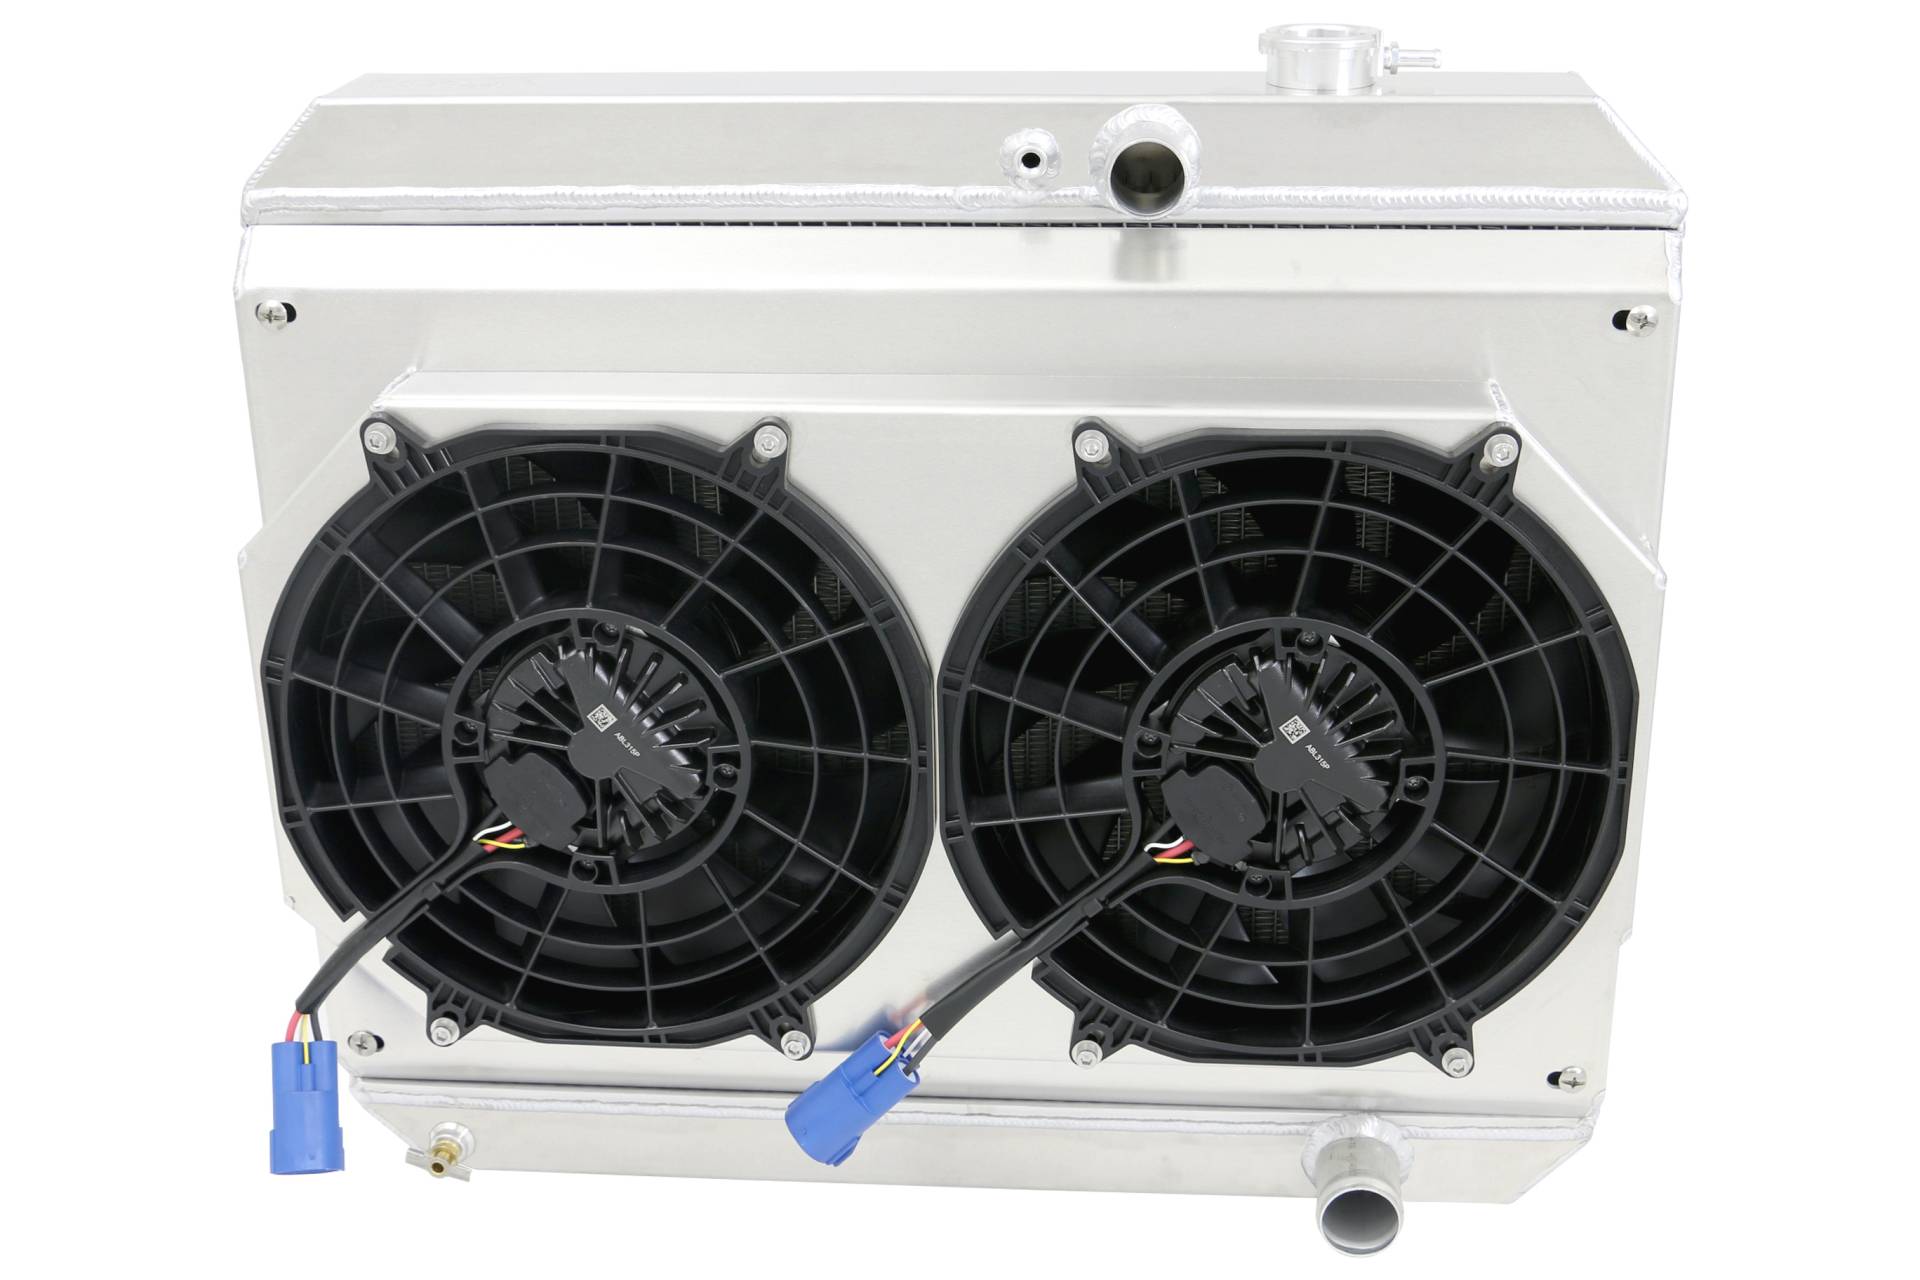 Wizard Cooling Inc - Wizard Cooling - 1965 Oldsmobile Cutlass /442 Aluminum Radiator (17.5" Core, LS Motor) With Brushless Fans - 25180-112LSBLAC